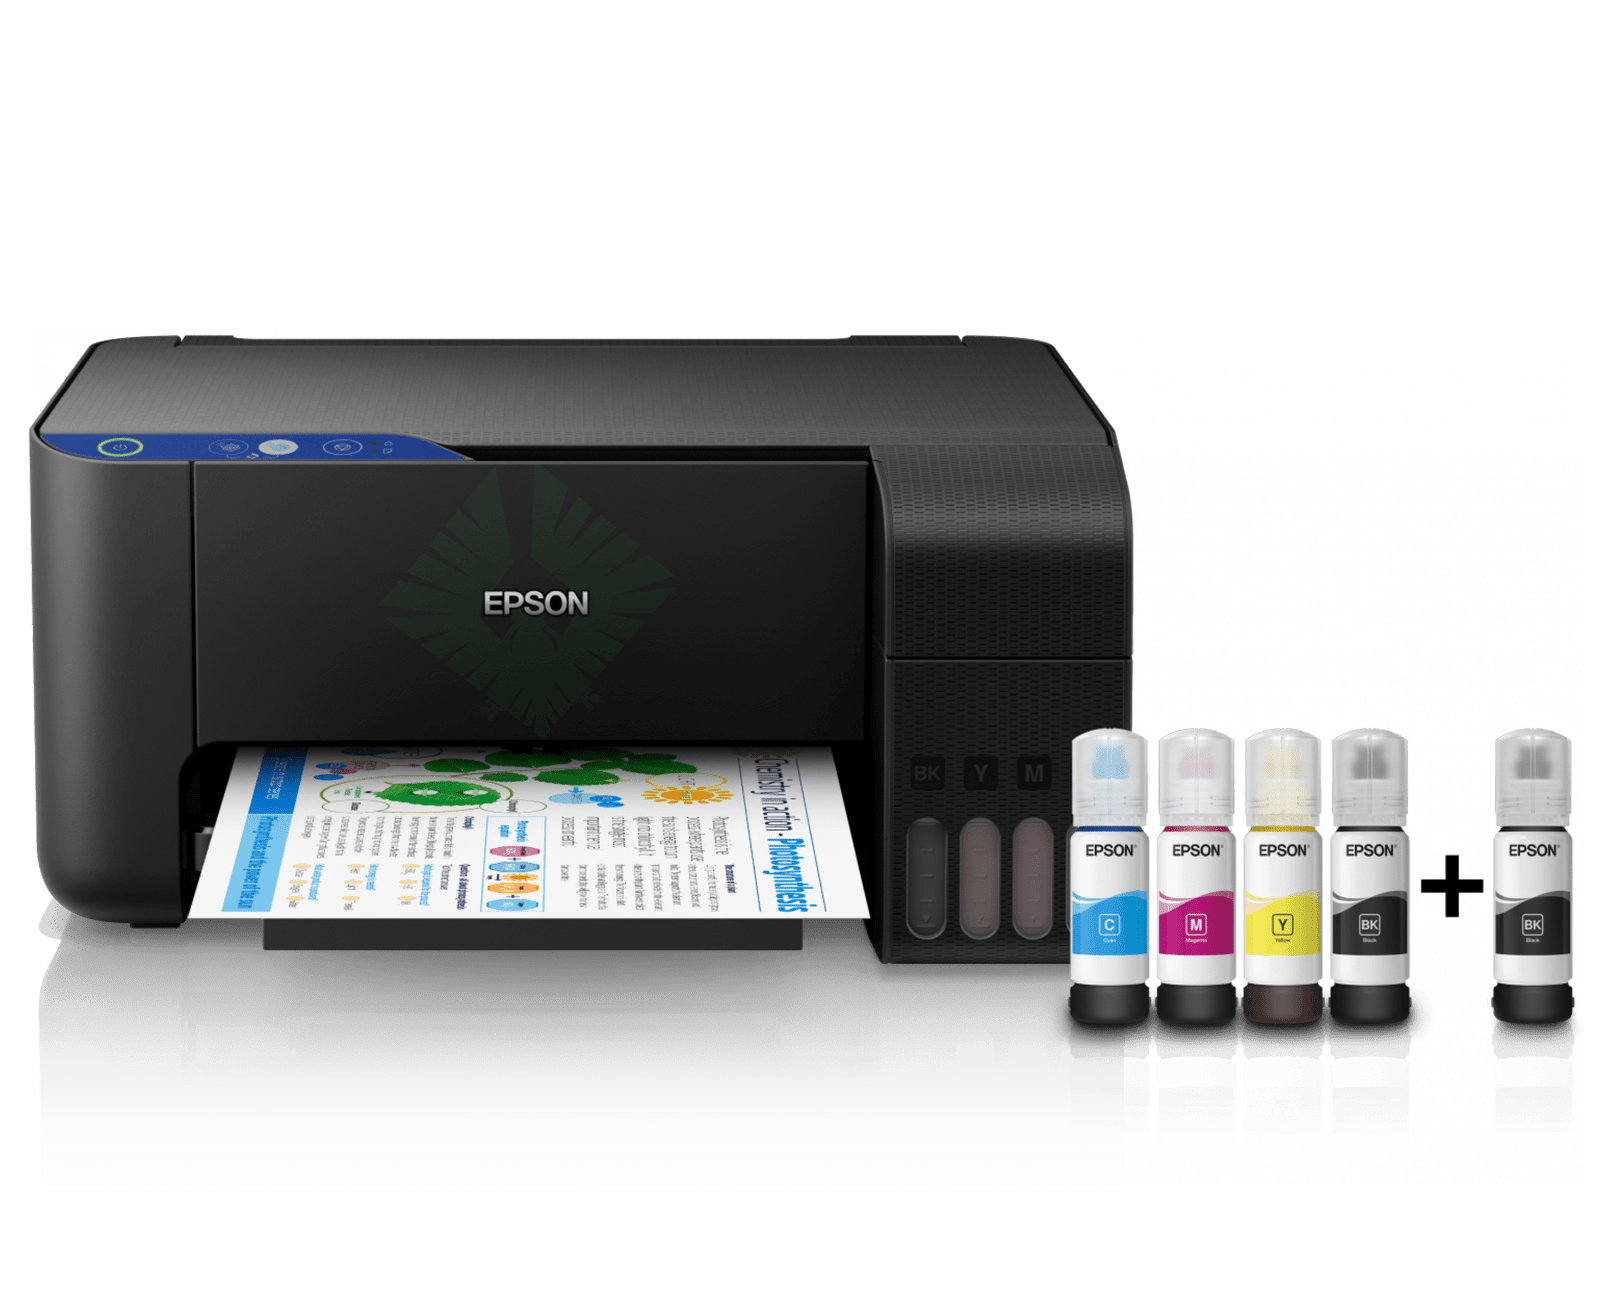 Epson L3111 All In One Printer